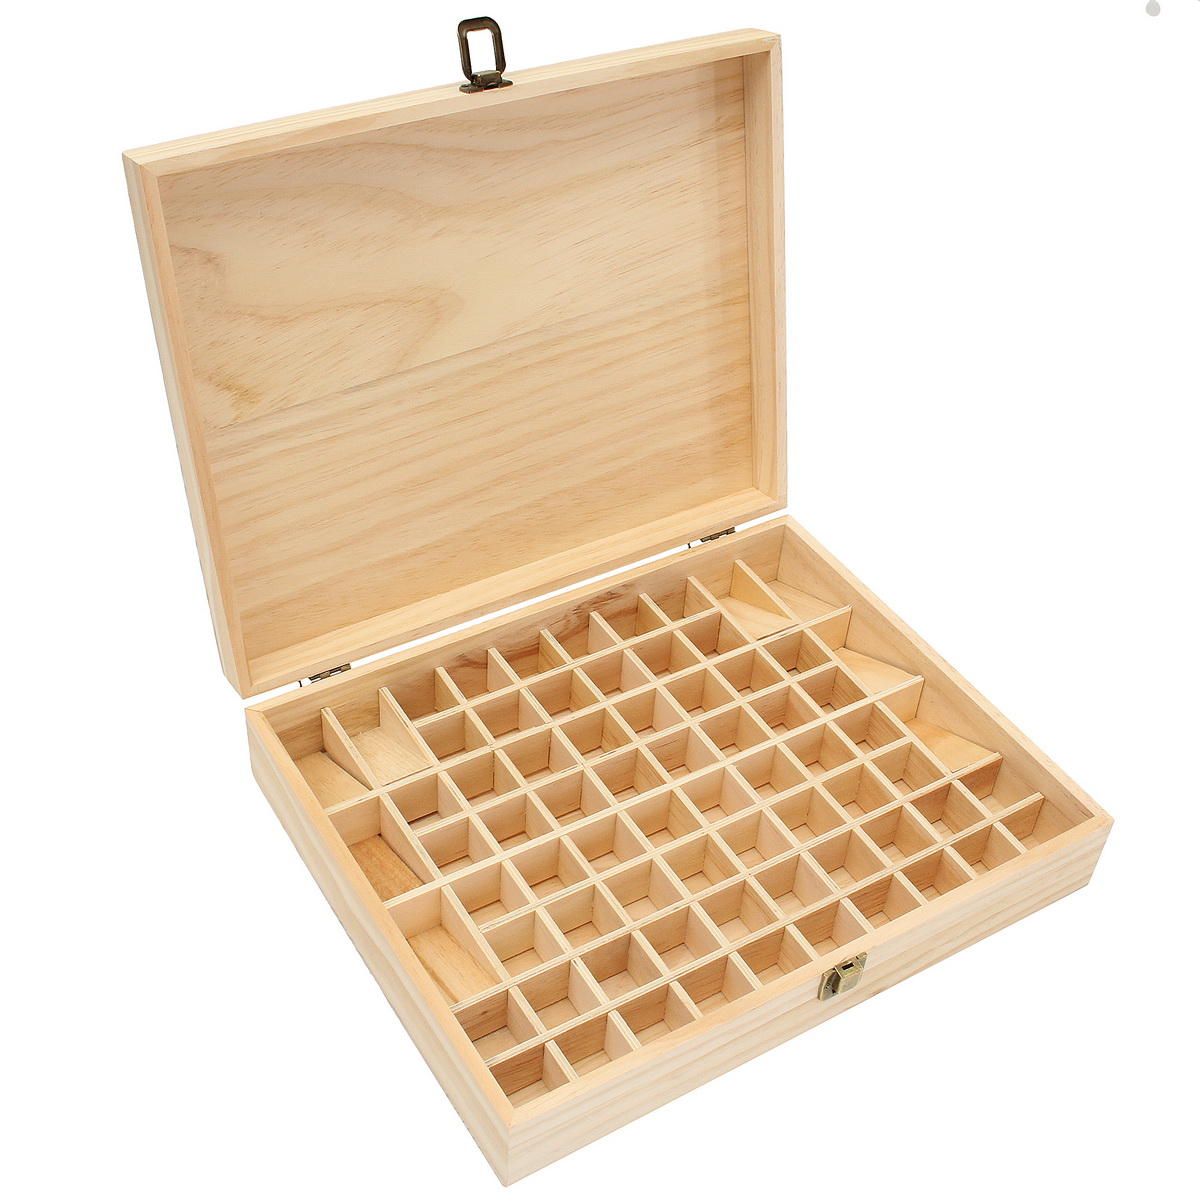 72 Grids Wooden Bottles BoxContainer Organizer Storage for Essential Oil Aromatherapy